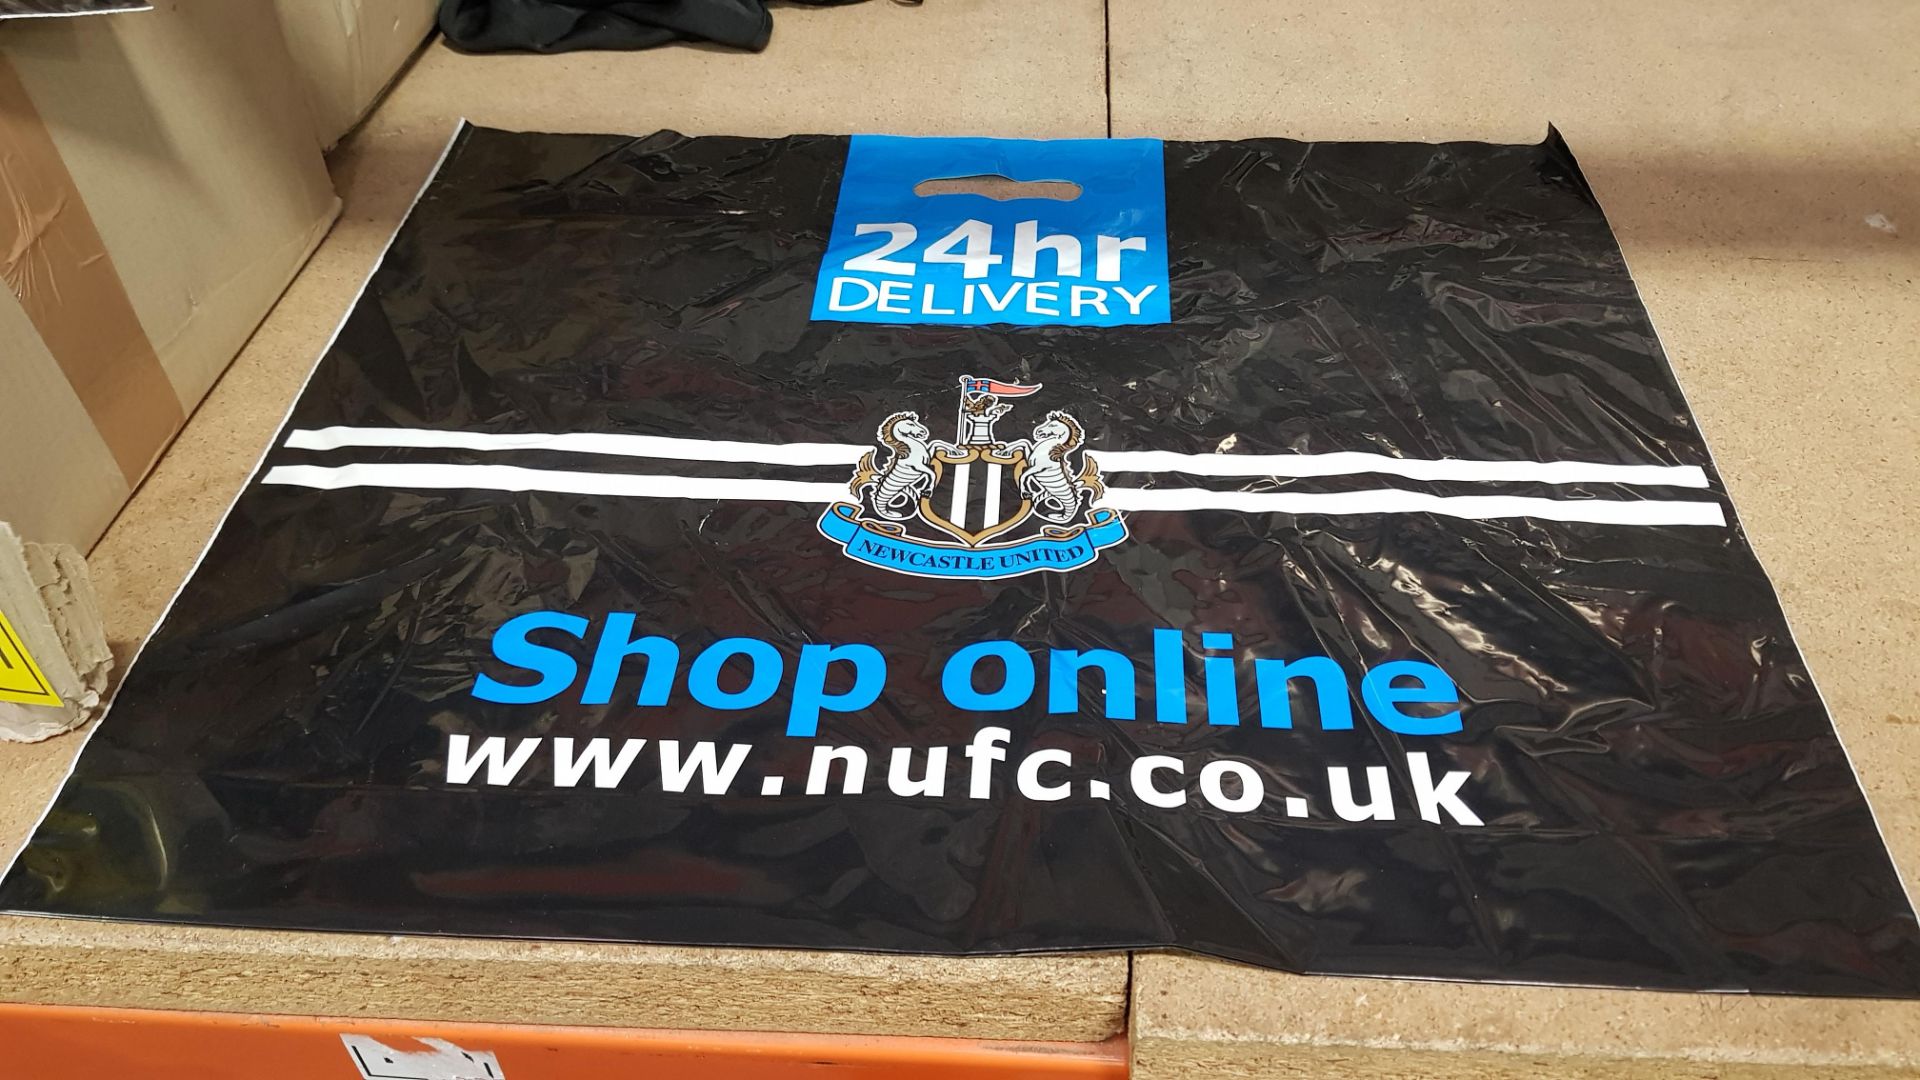 APPROX 1500 NEWCASTLE UNITED CARRIER BAGS ( 60 CM WIDTH X 50 CM HEIGHT )